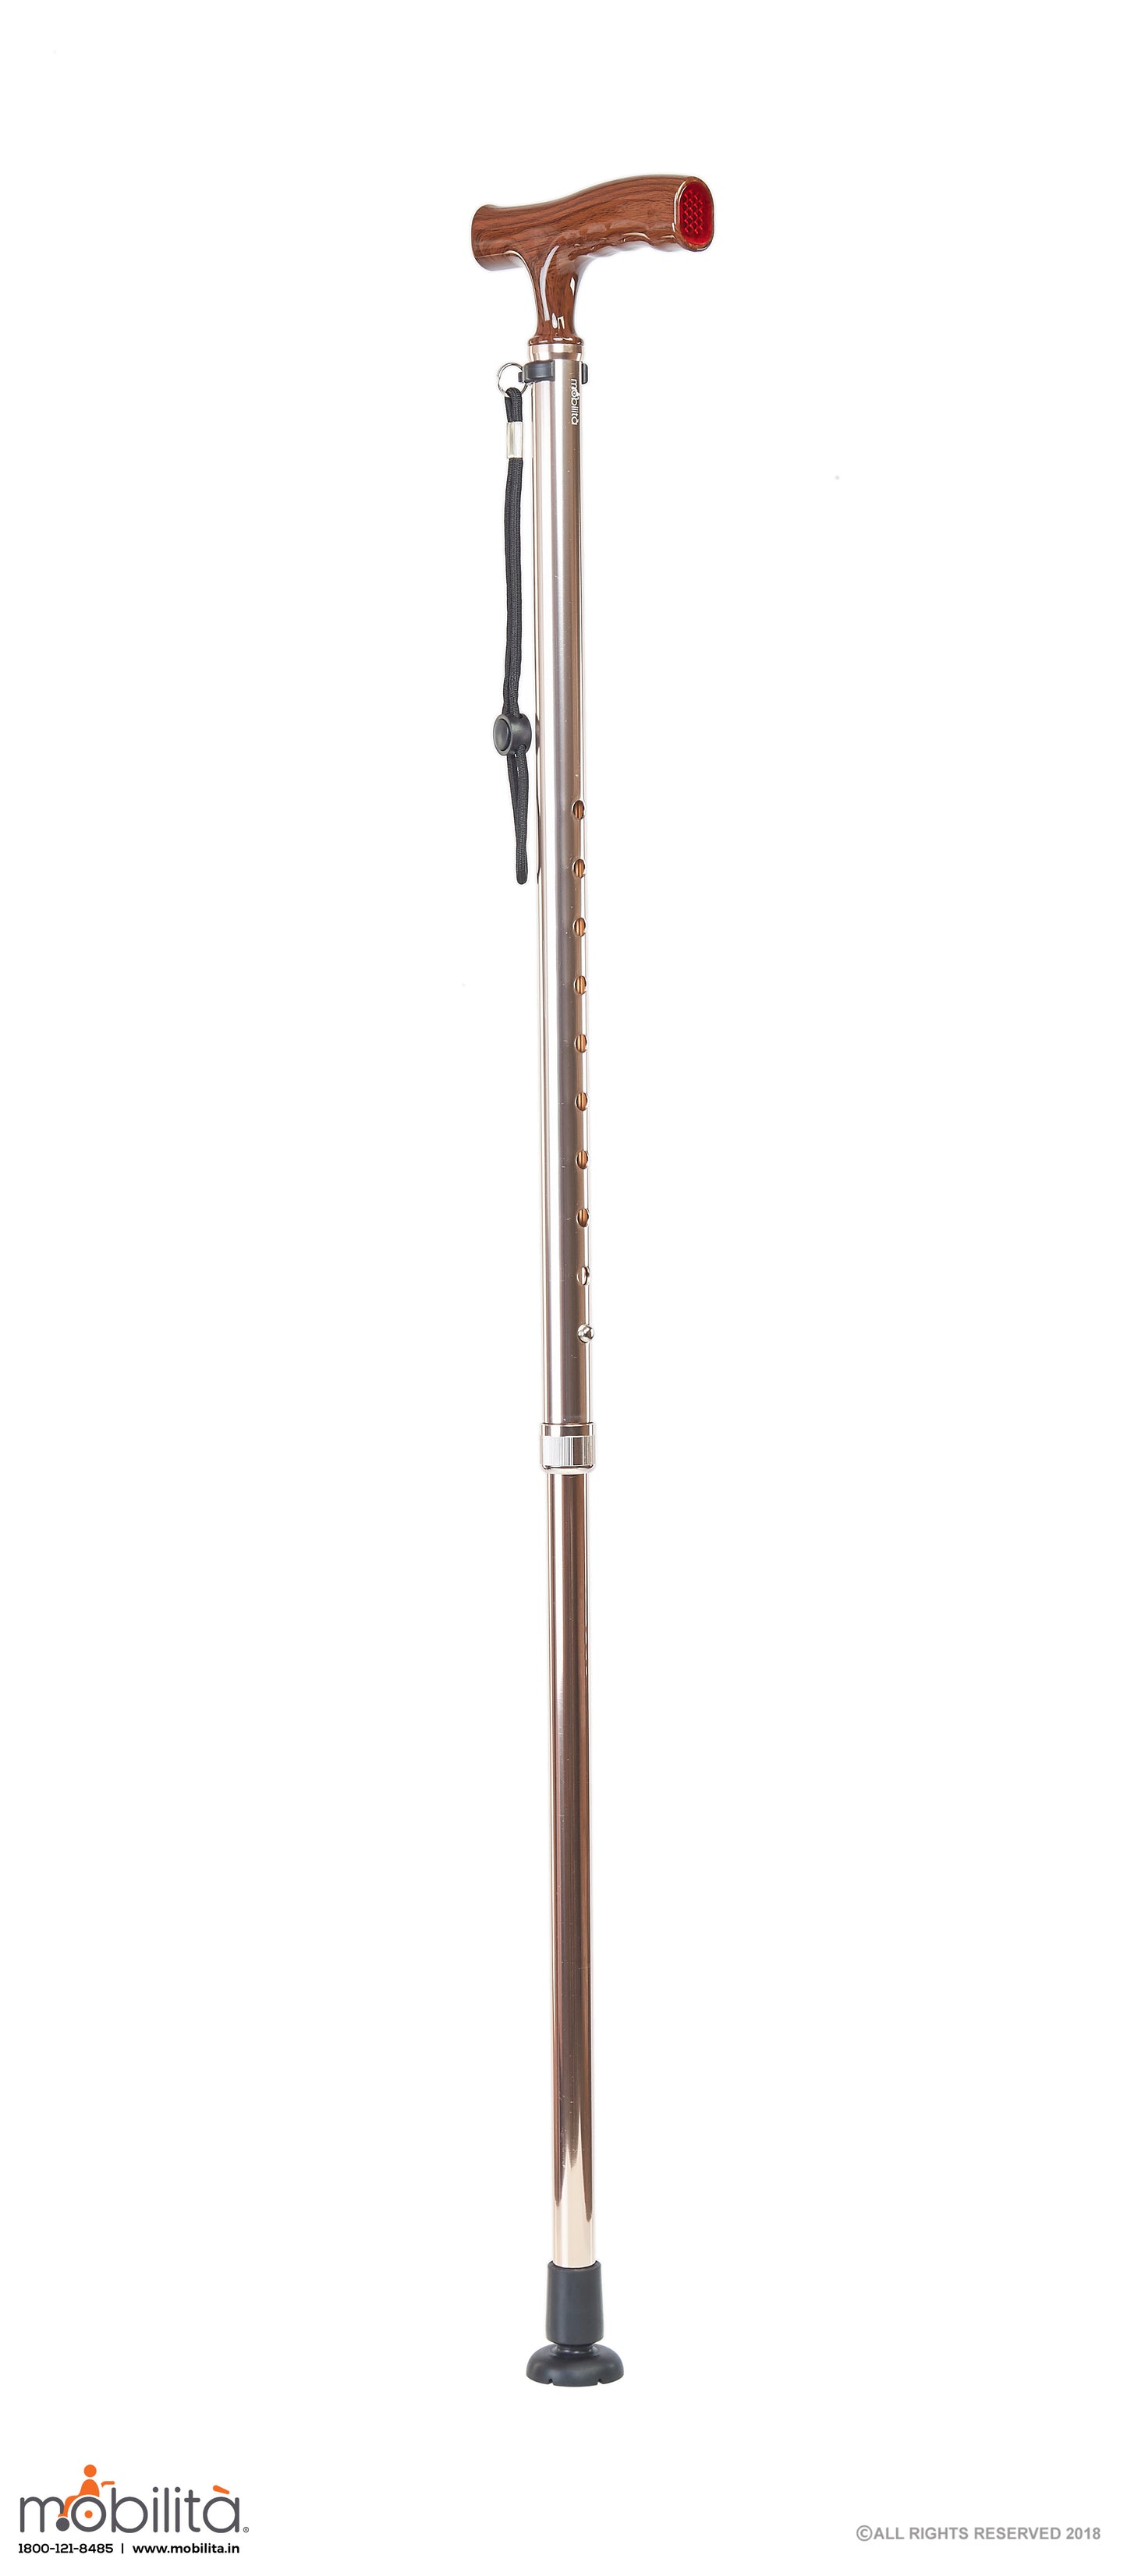 M 706 - Walking Cane - Single Foot - Straight Shank - Champagne Gold